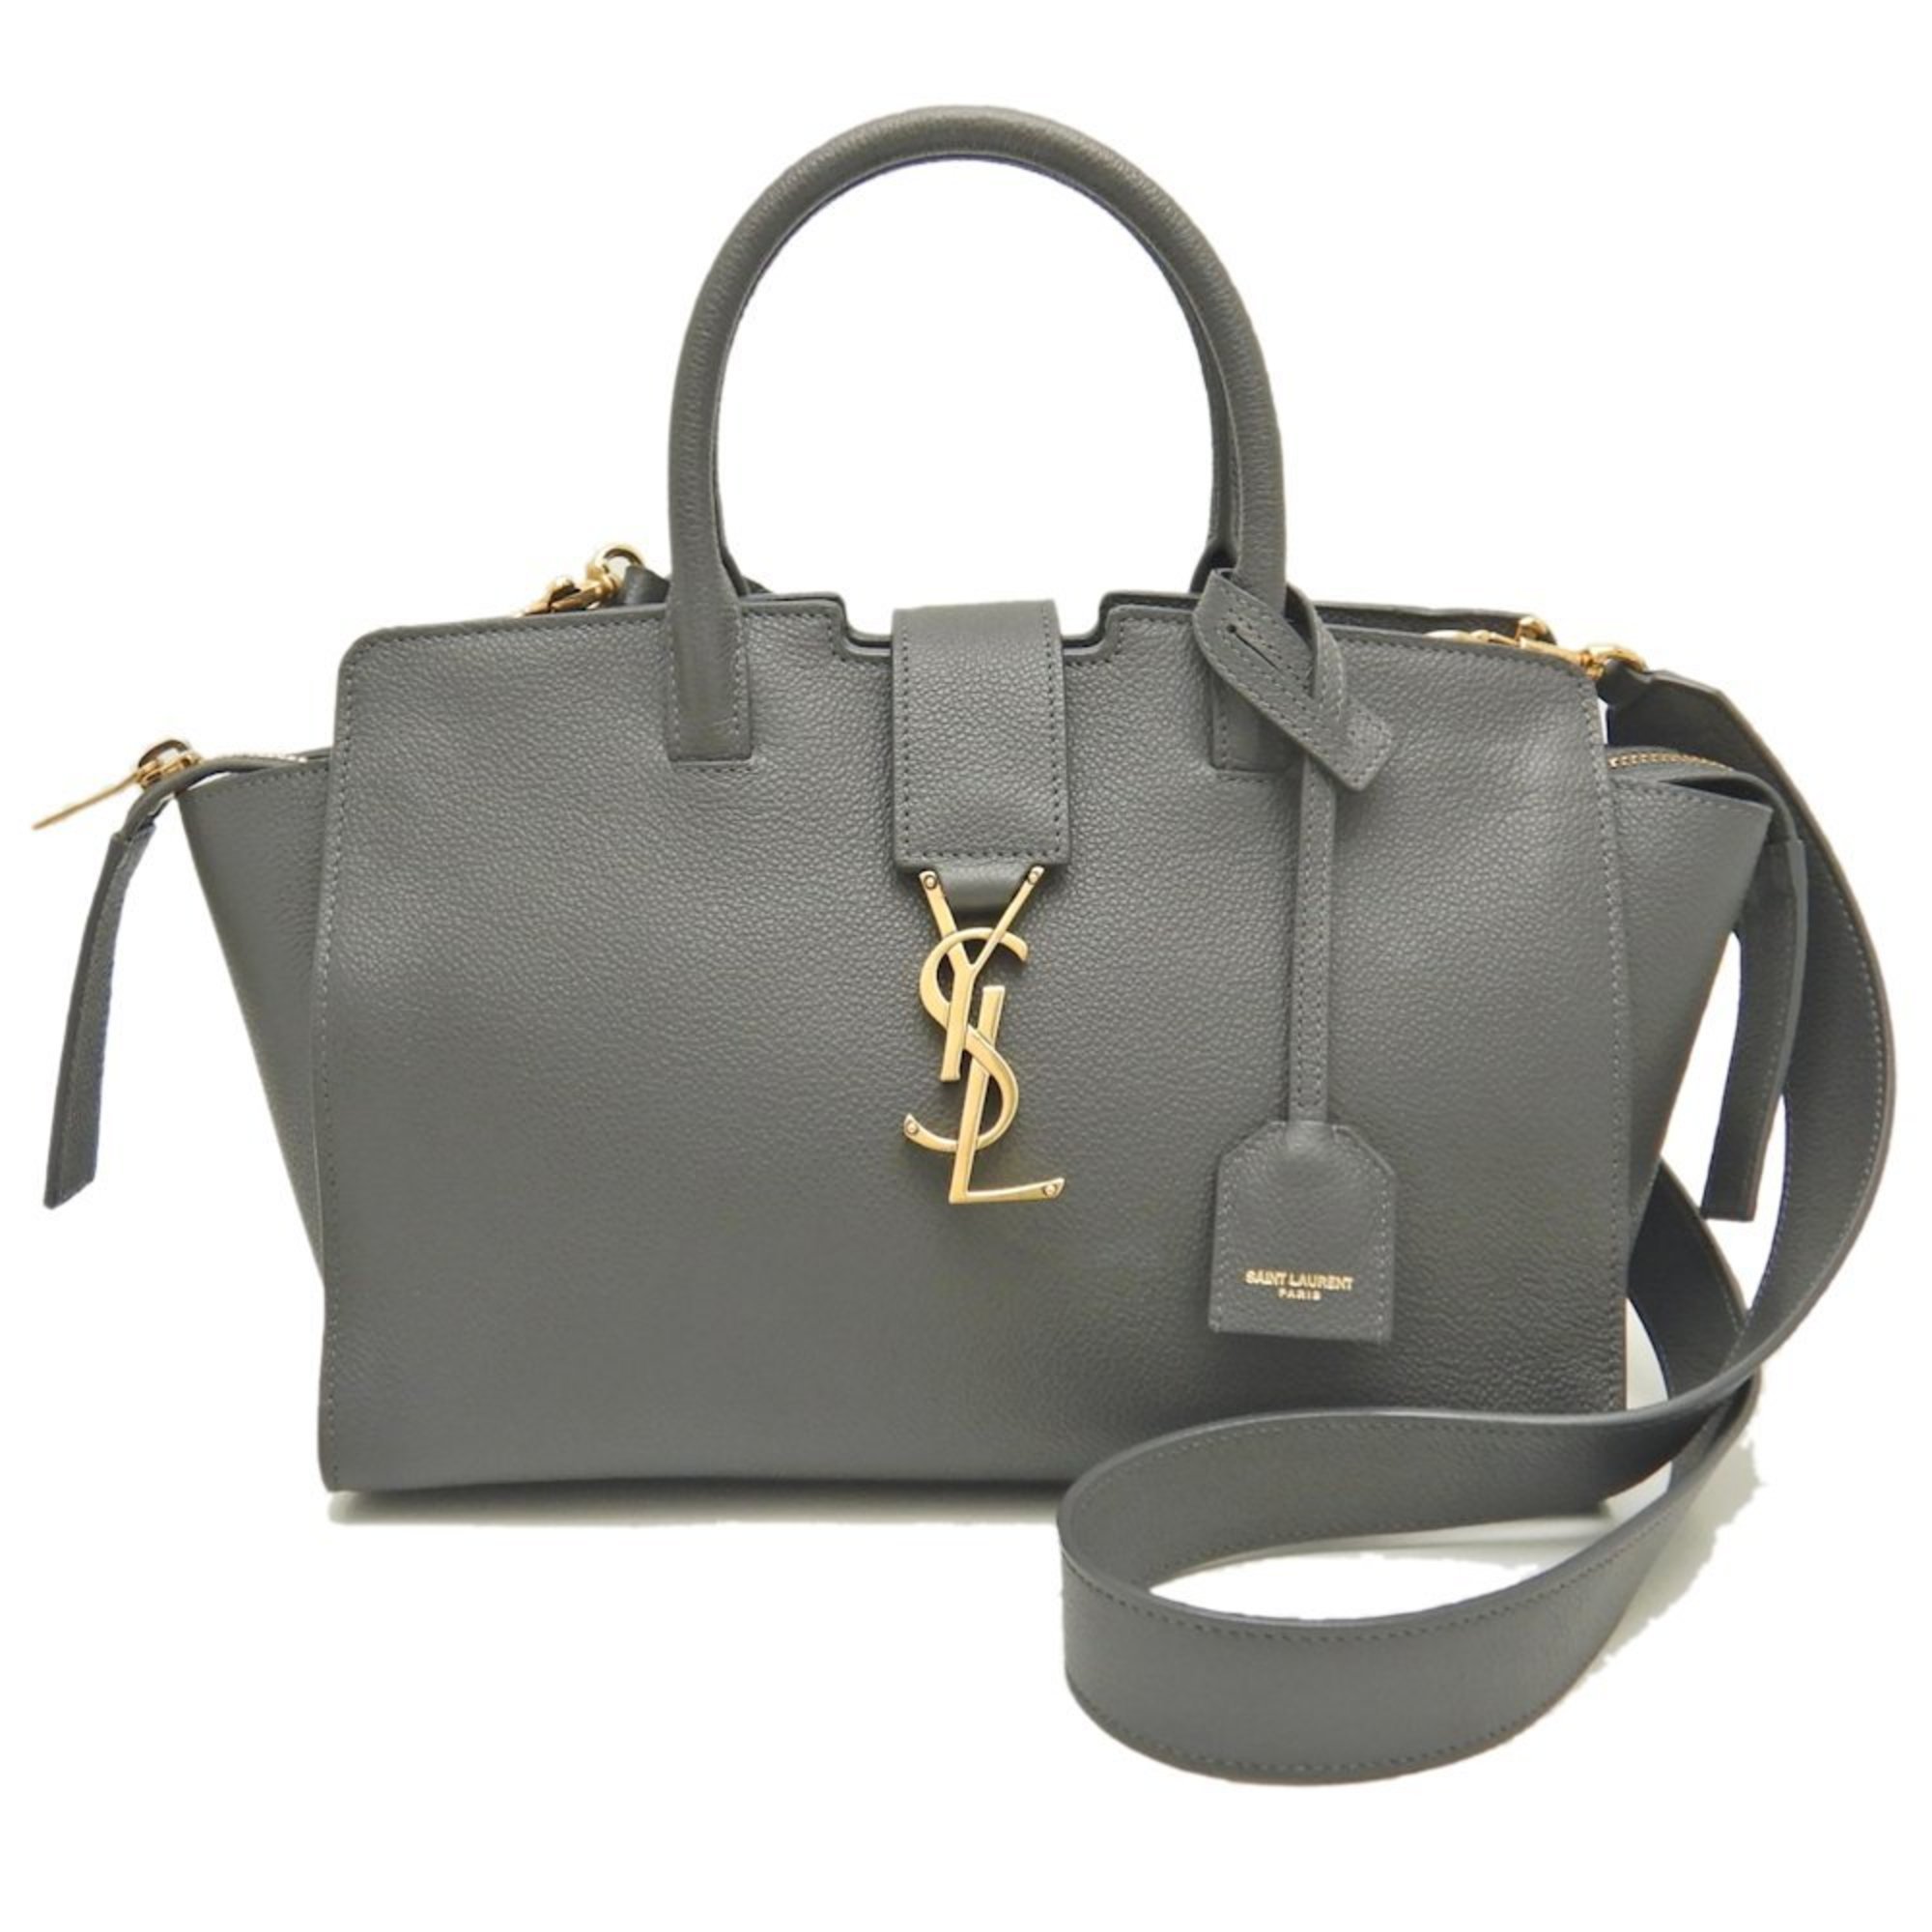 SAINT LAURENT Downtown Baby 635346 handbag in grained leather and grey 251792